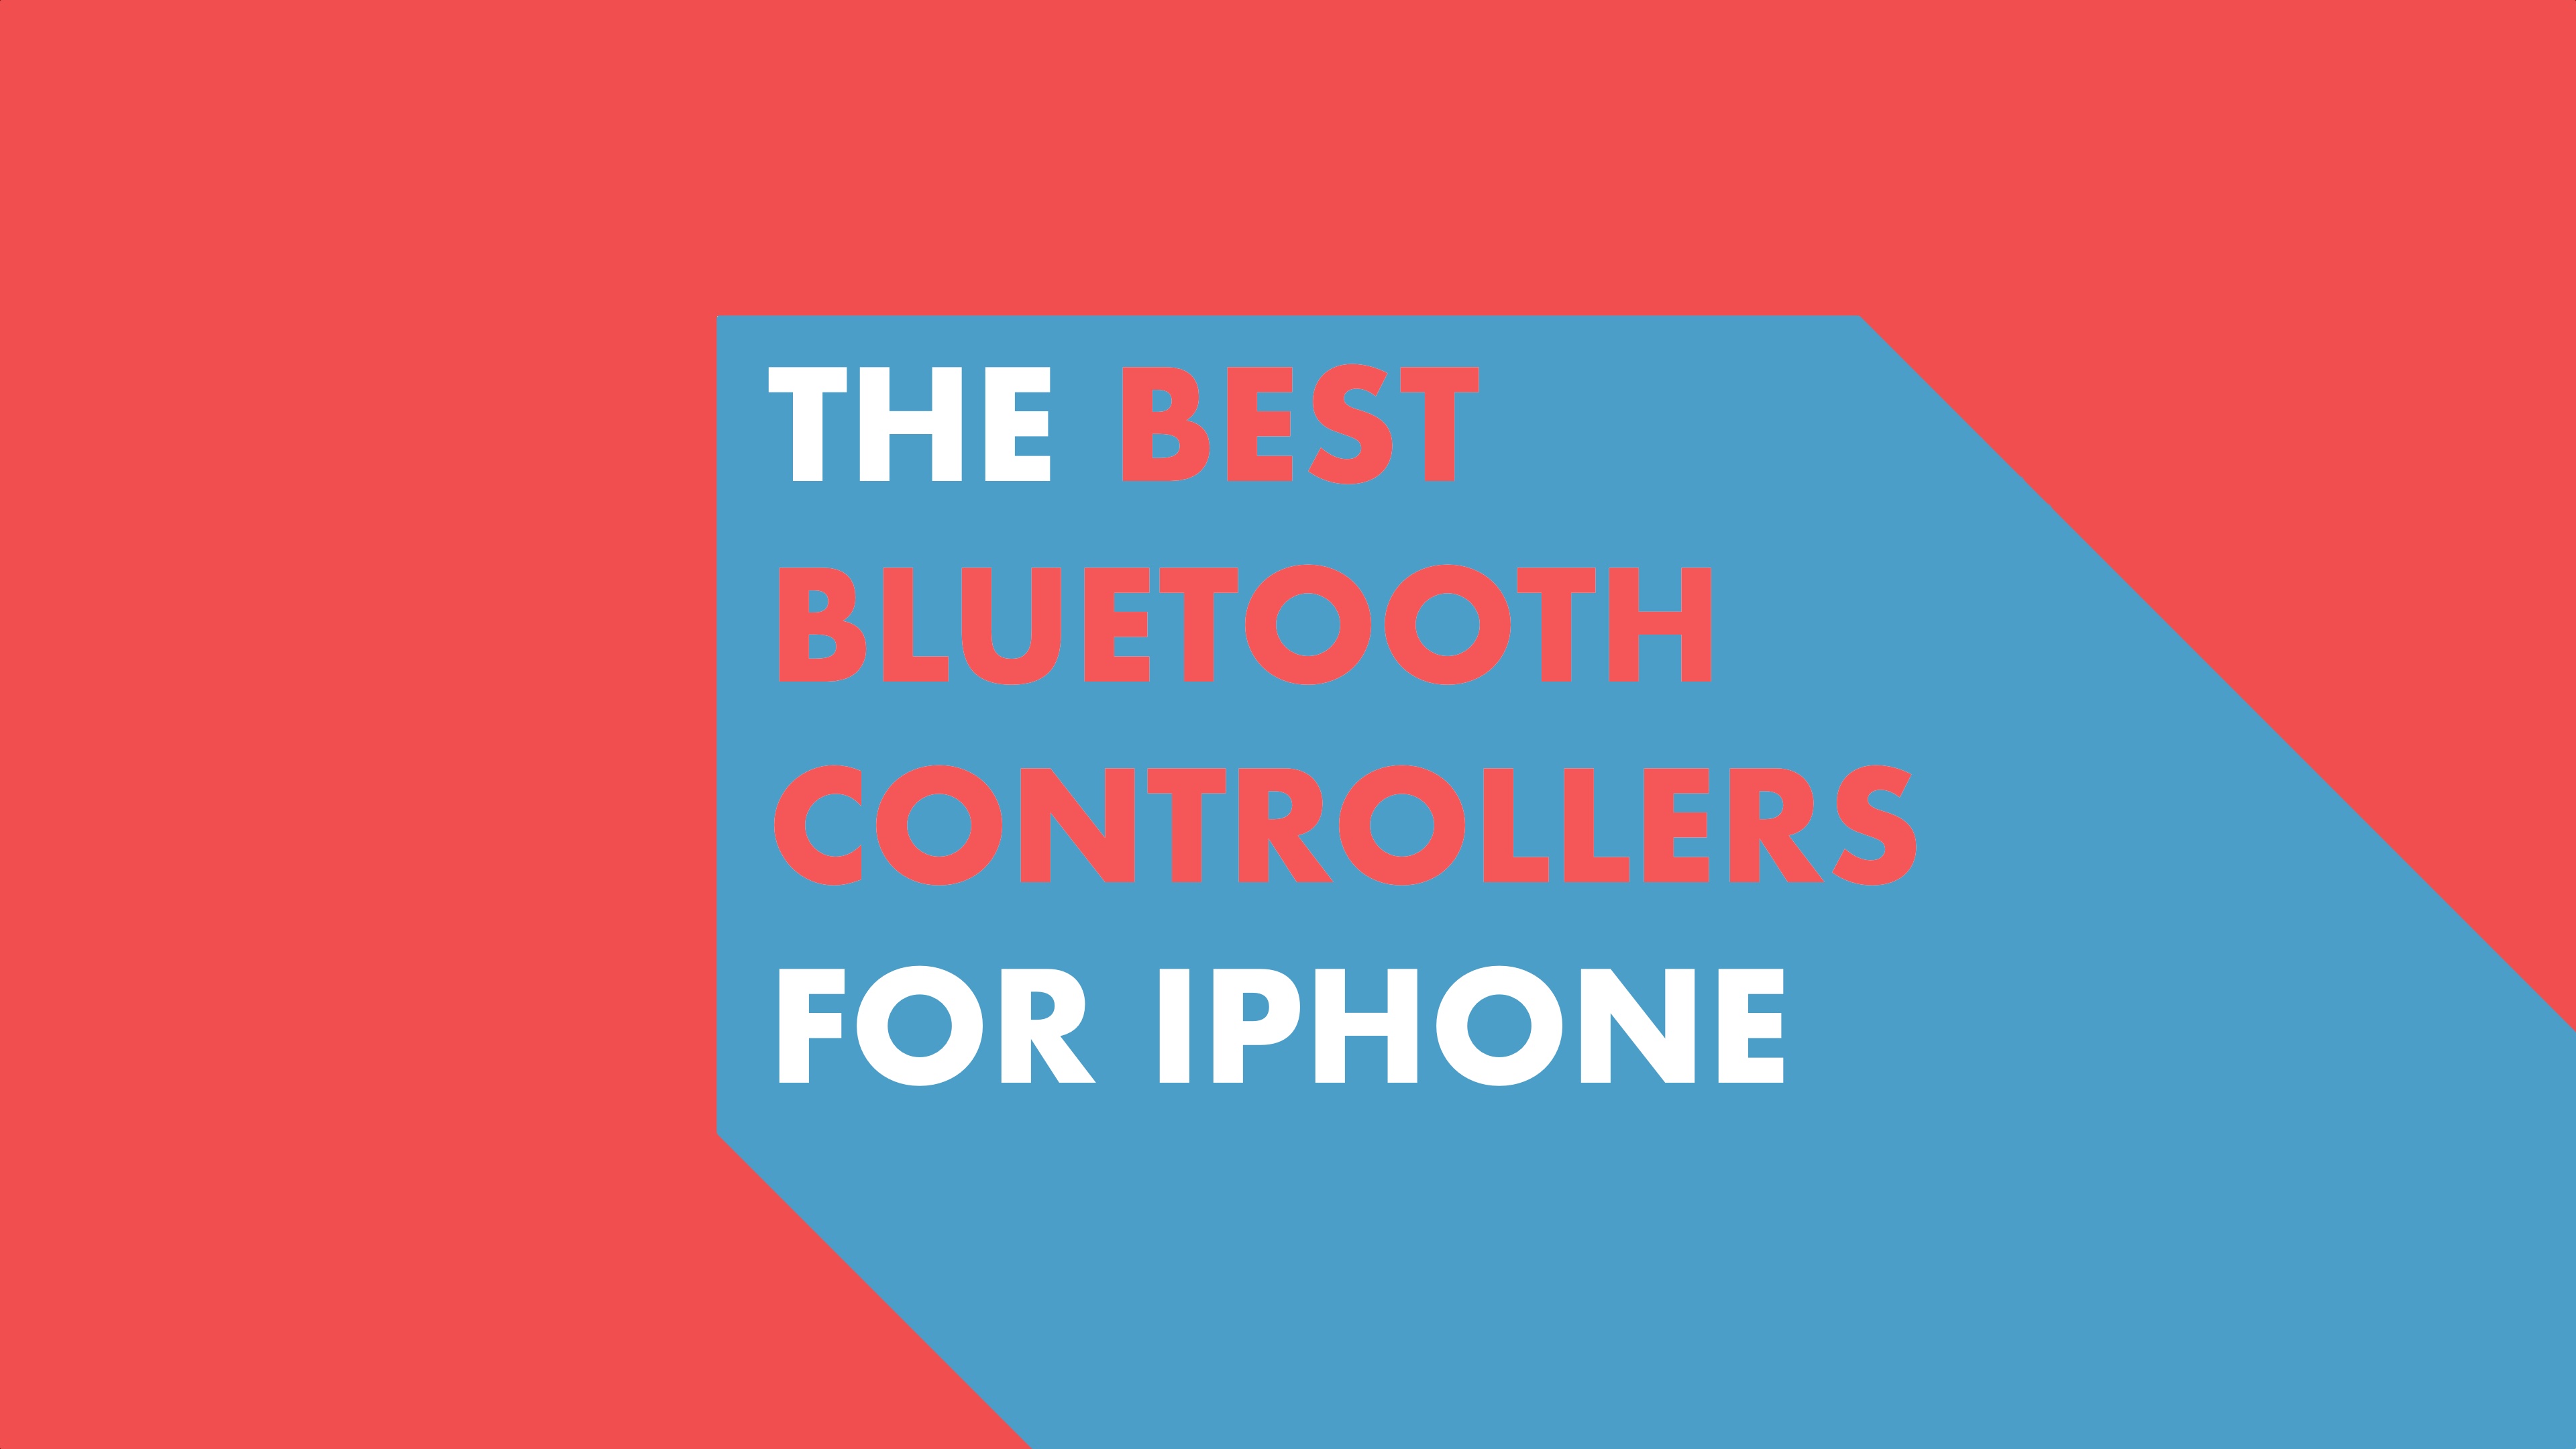 The best Bluetooth controllers for iPhone